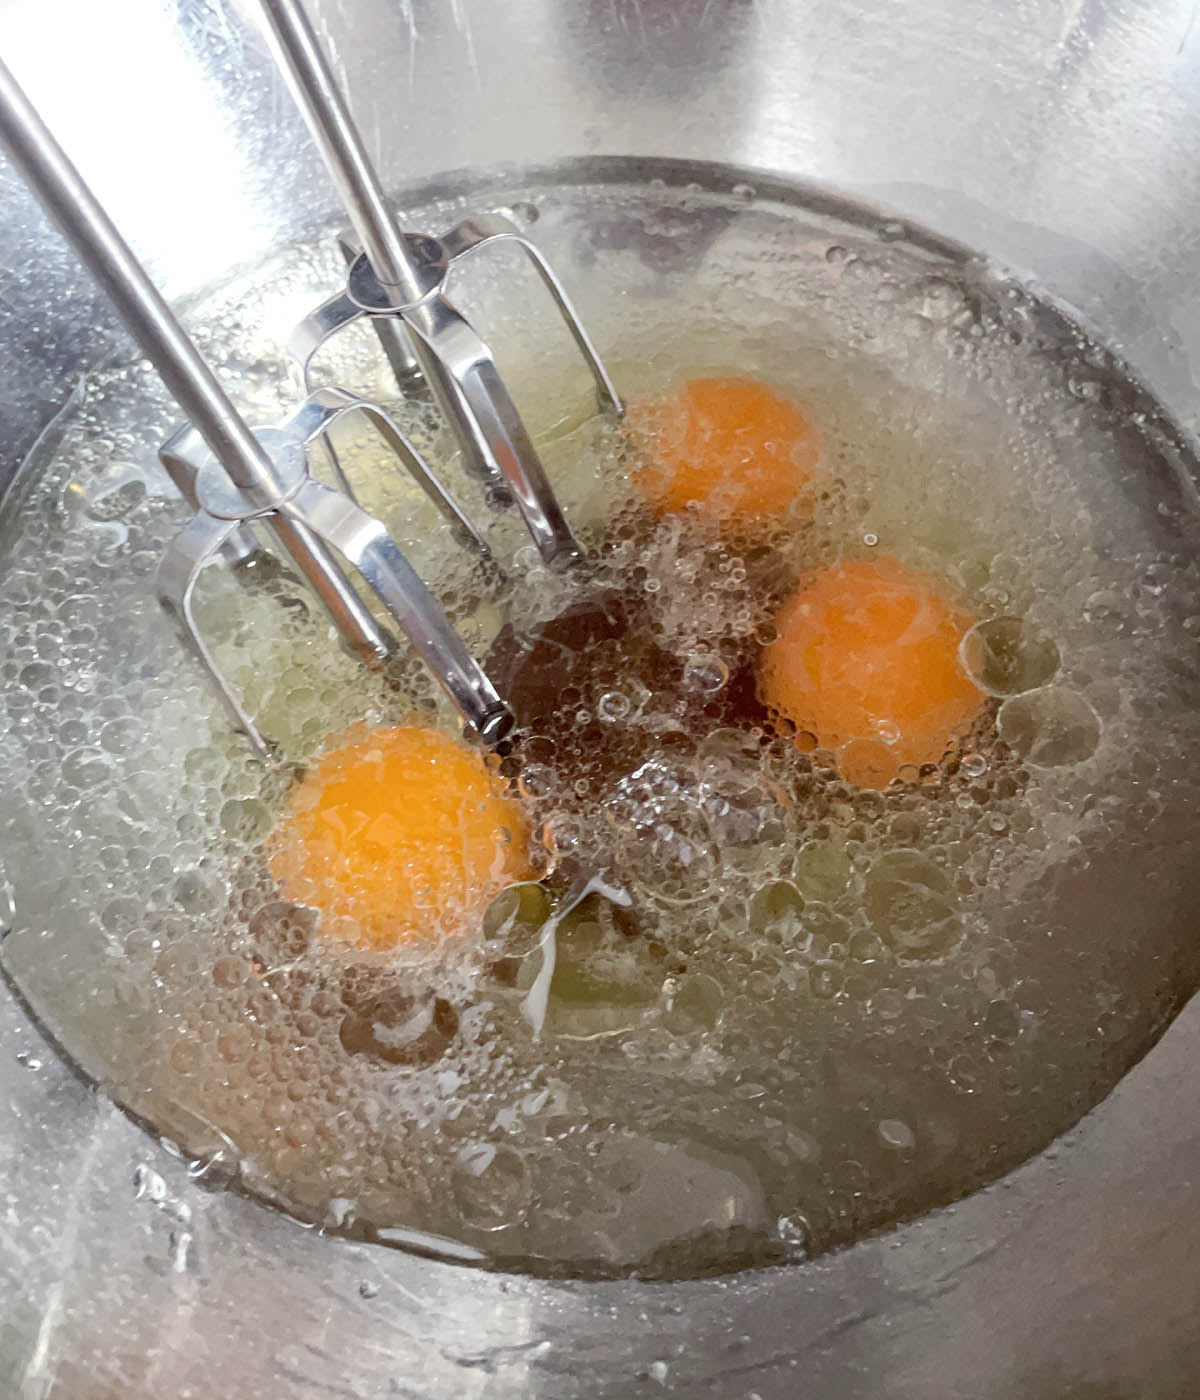 Two mixer beaters in a metal round bowl containing 3 egg, oil, and clear liquid.